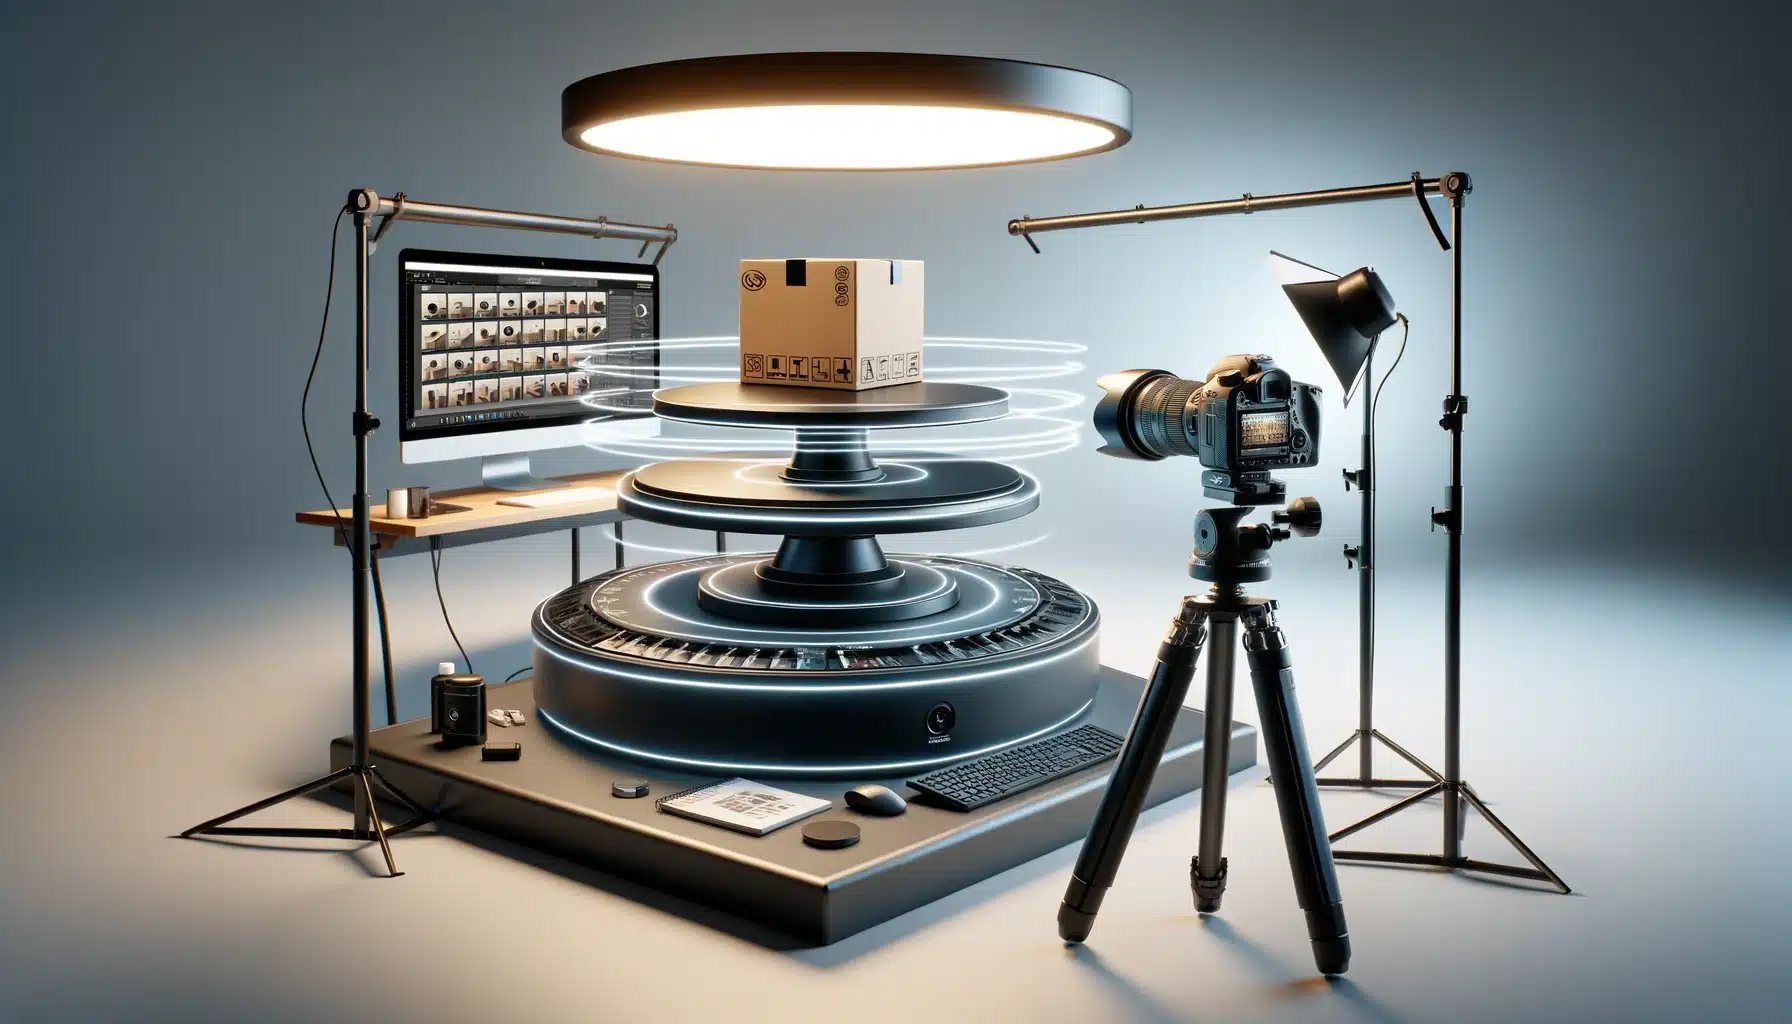 Professional studio setup for 360 product photography with a product on a rotating platform, camera on tripod, and computer showing image processing software.